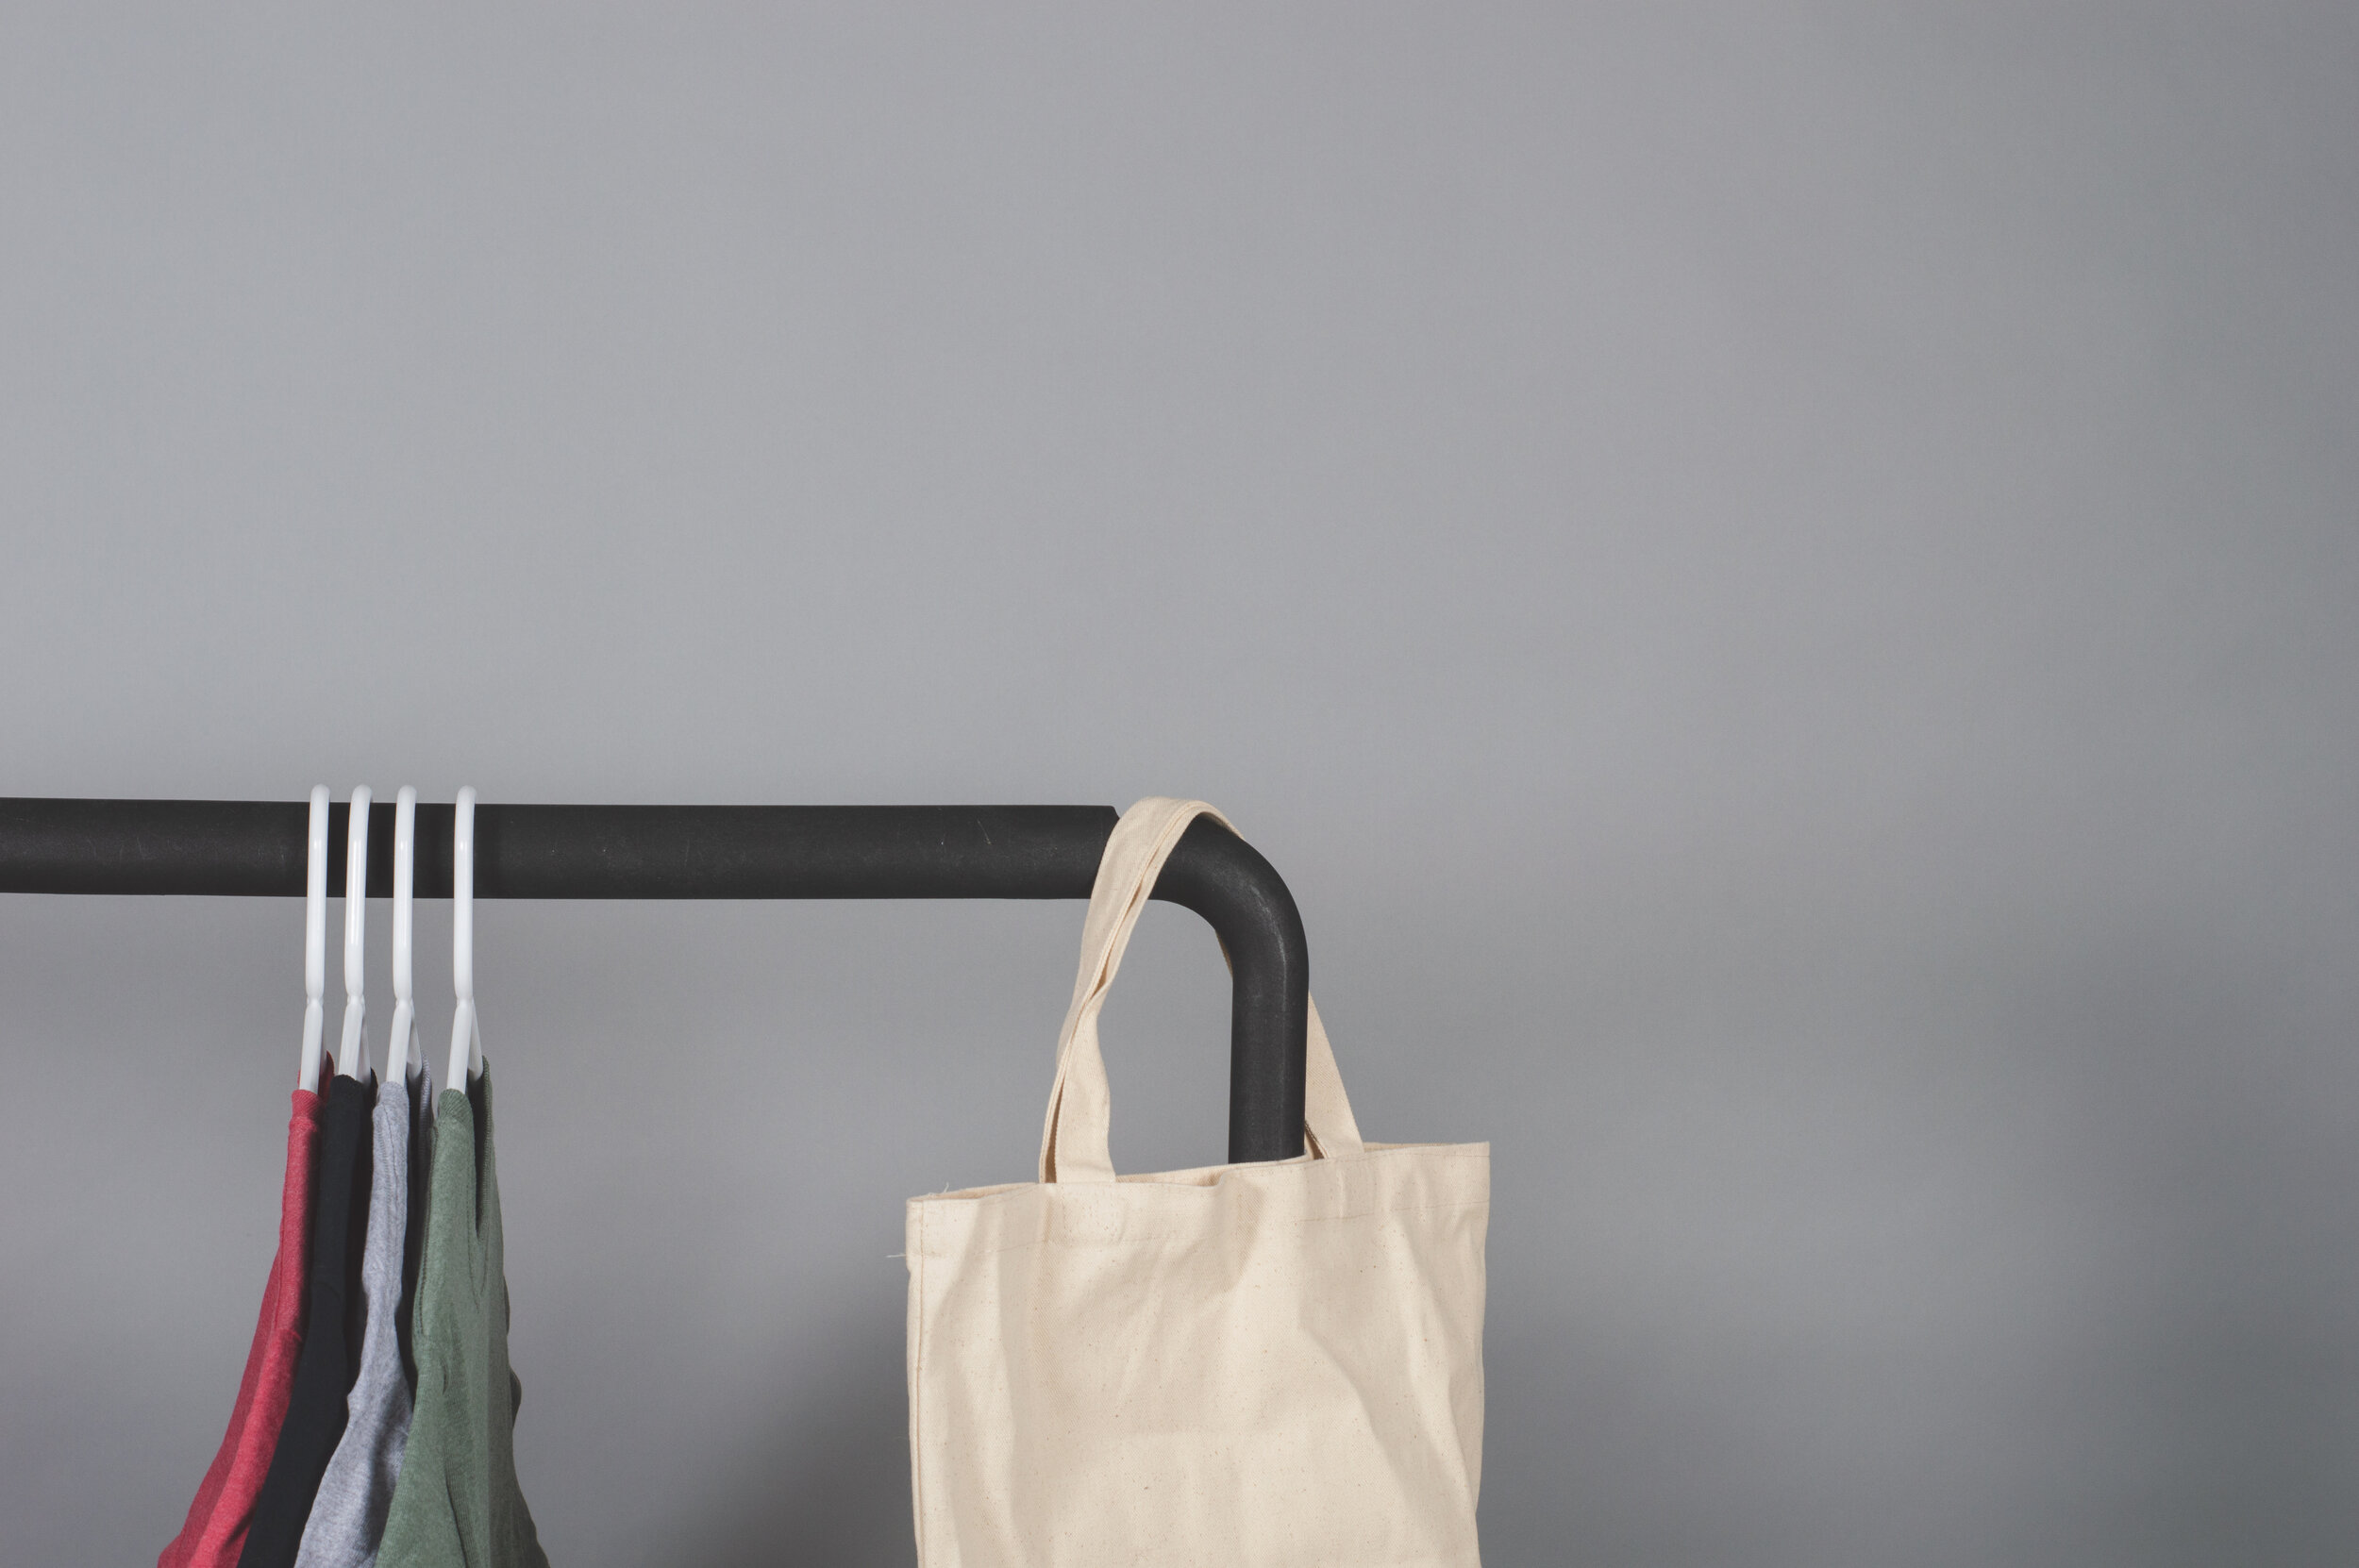 Why Tote Bags Are Back in Fashion – and Likely to Stay That Way